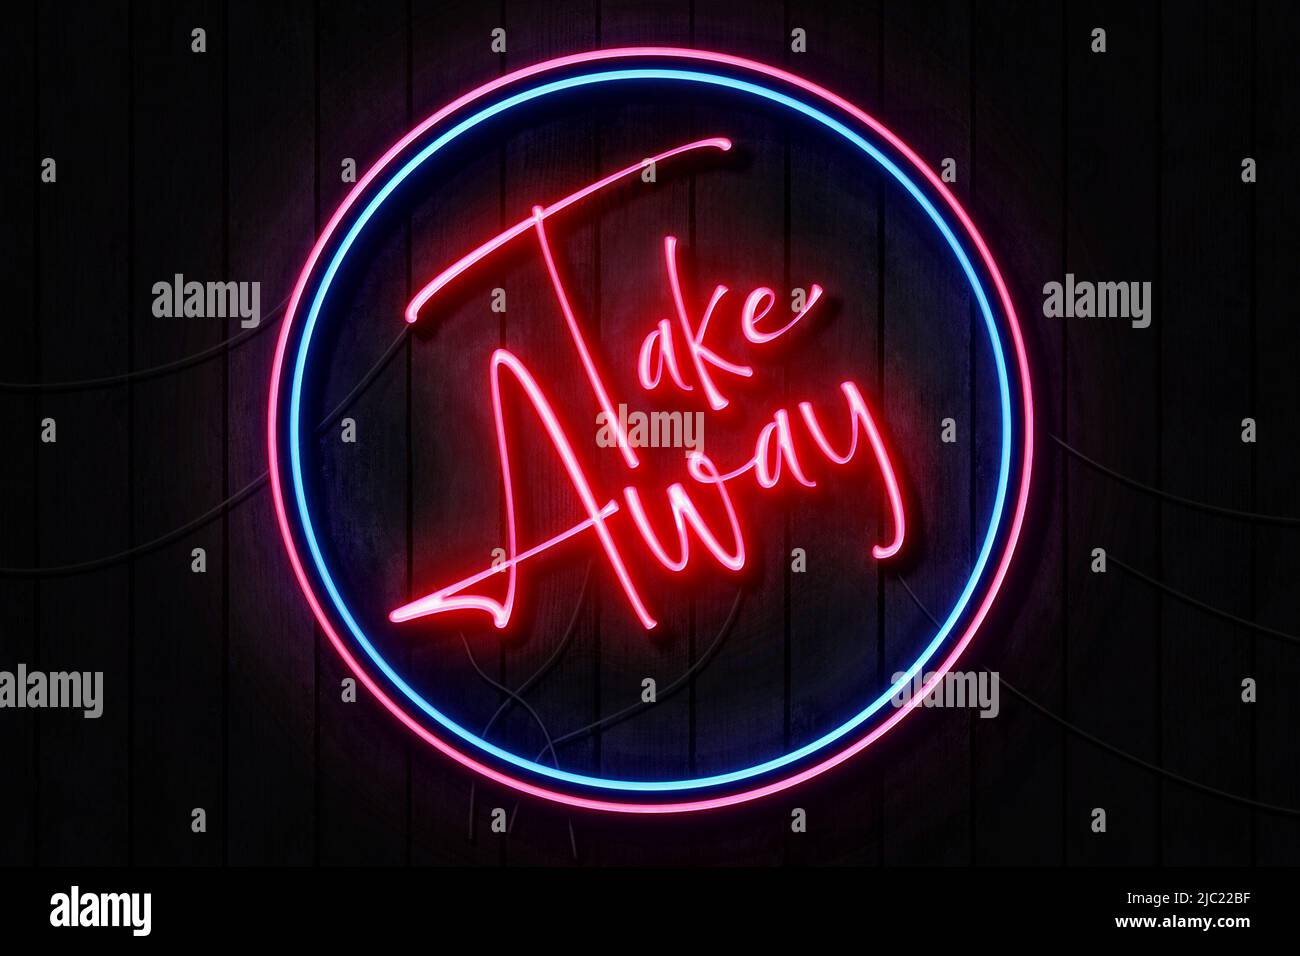 Take Away Neon Sign on a Dark Wooden Wall Stock Photo